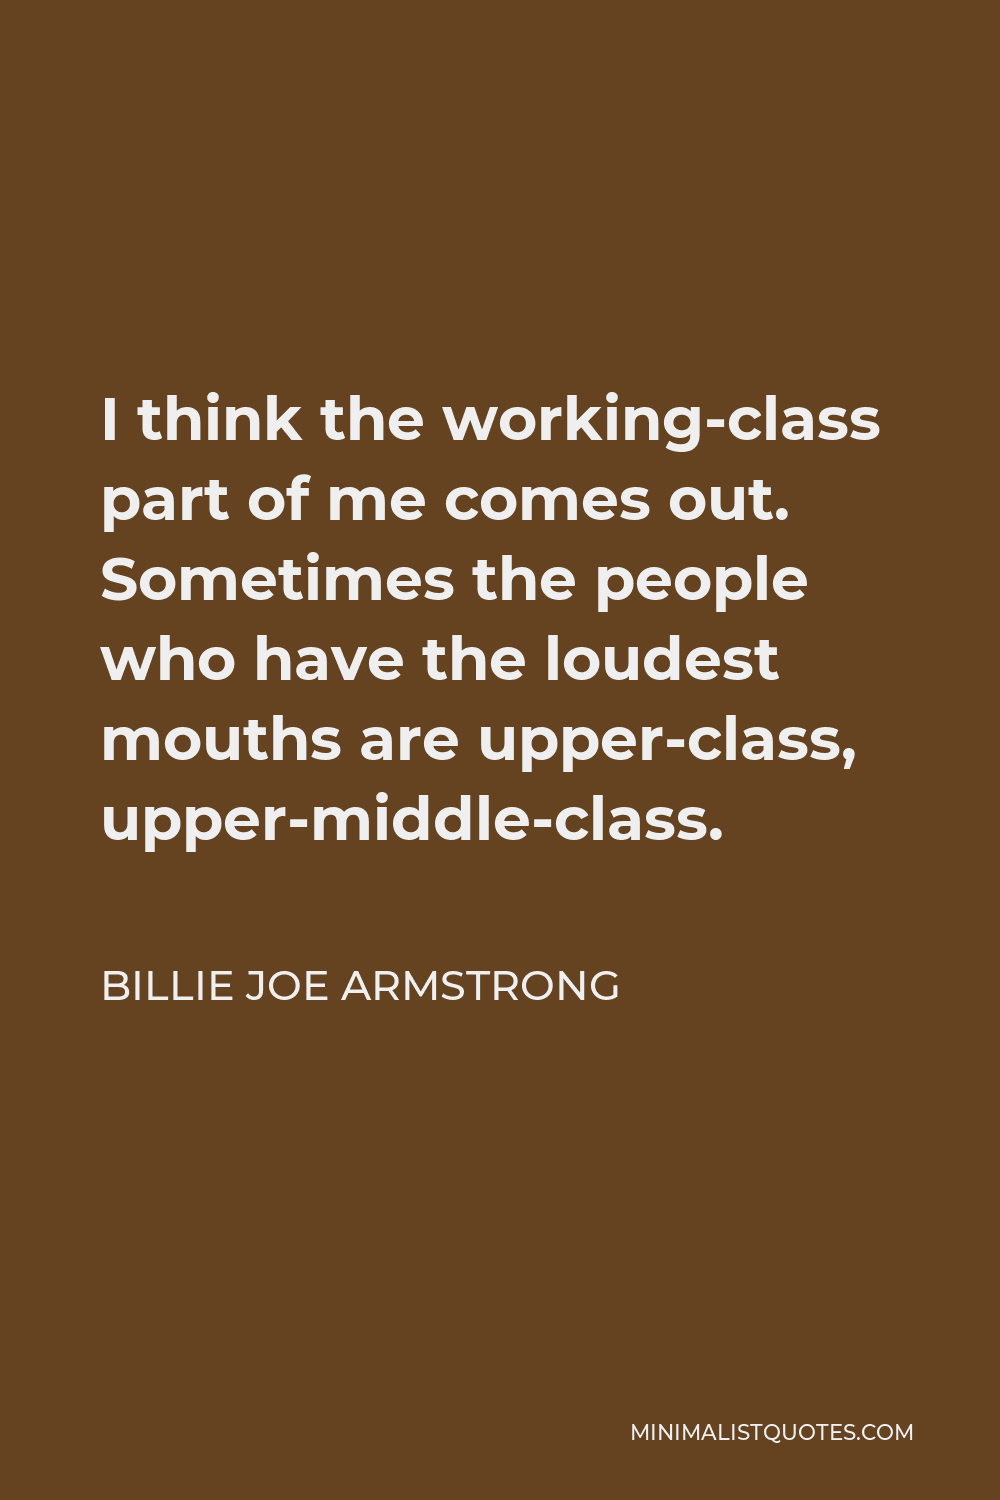 Billie Joe Armstrong Quote - I think the working-class part of me comes out. Sometimes the people who have the loudest mouths are upper-class, upper-middle-class.